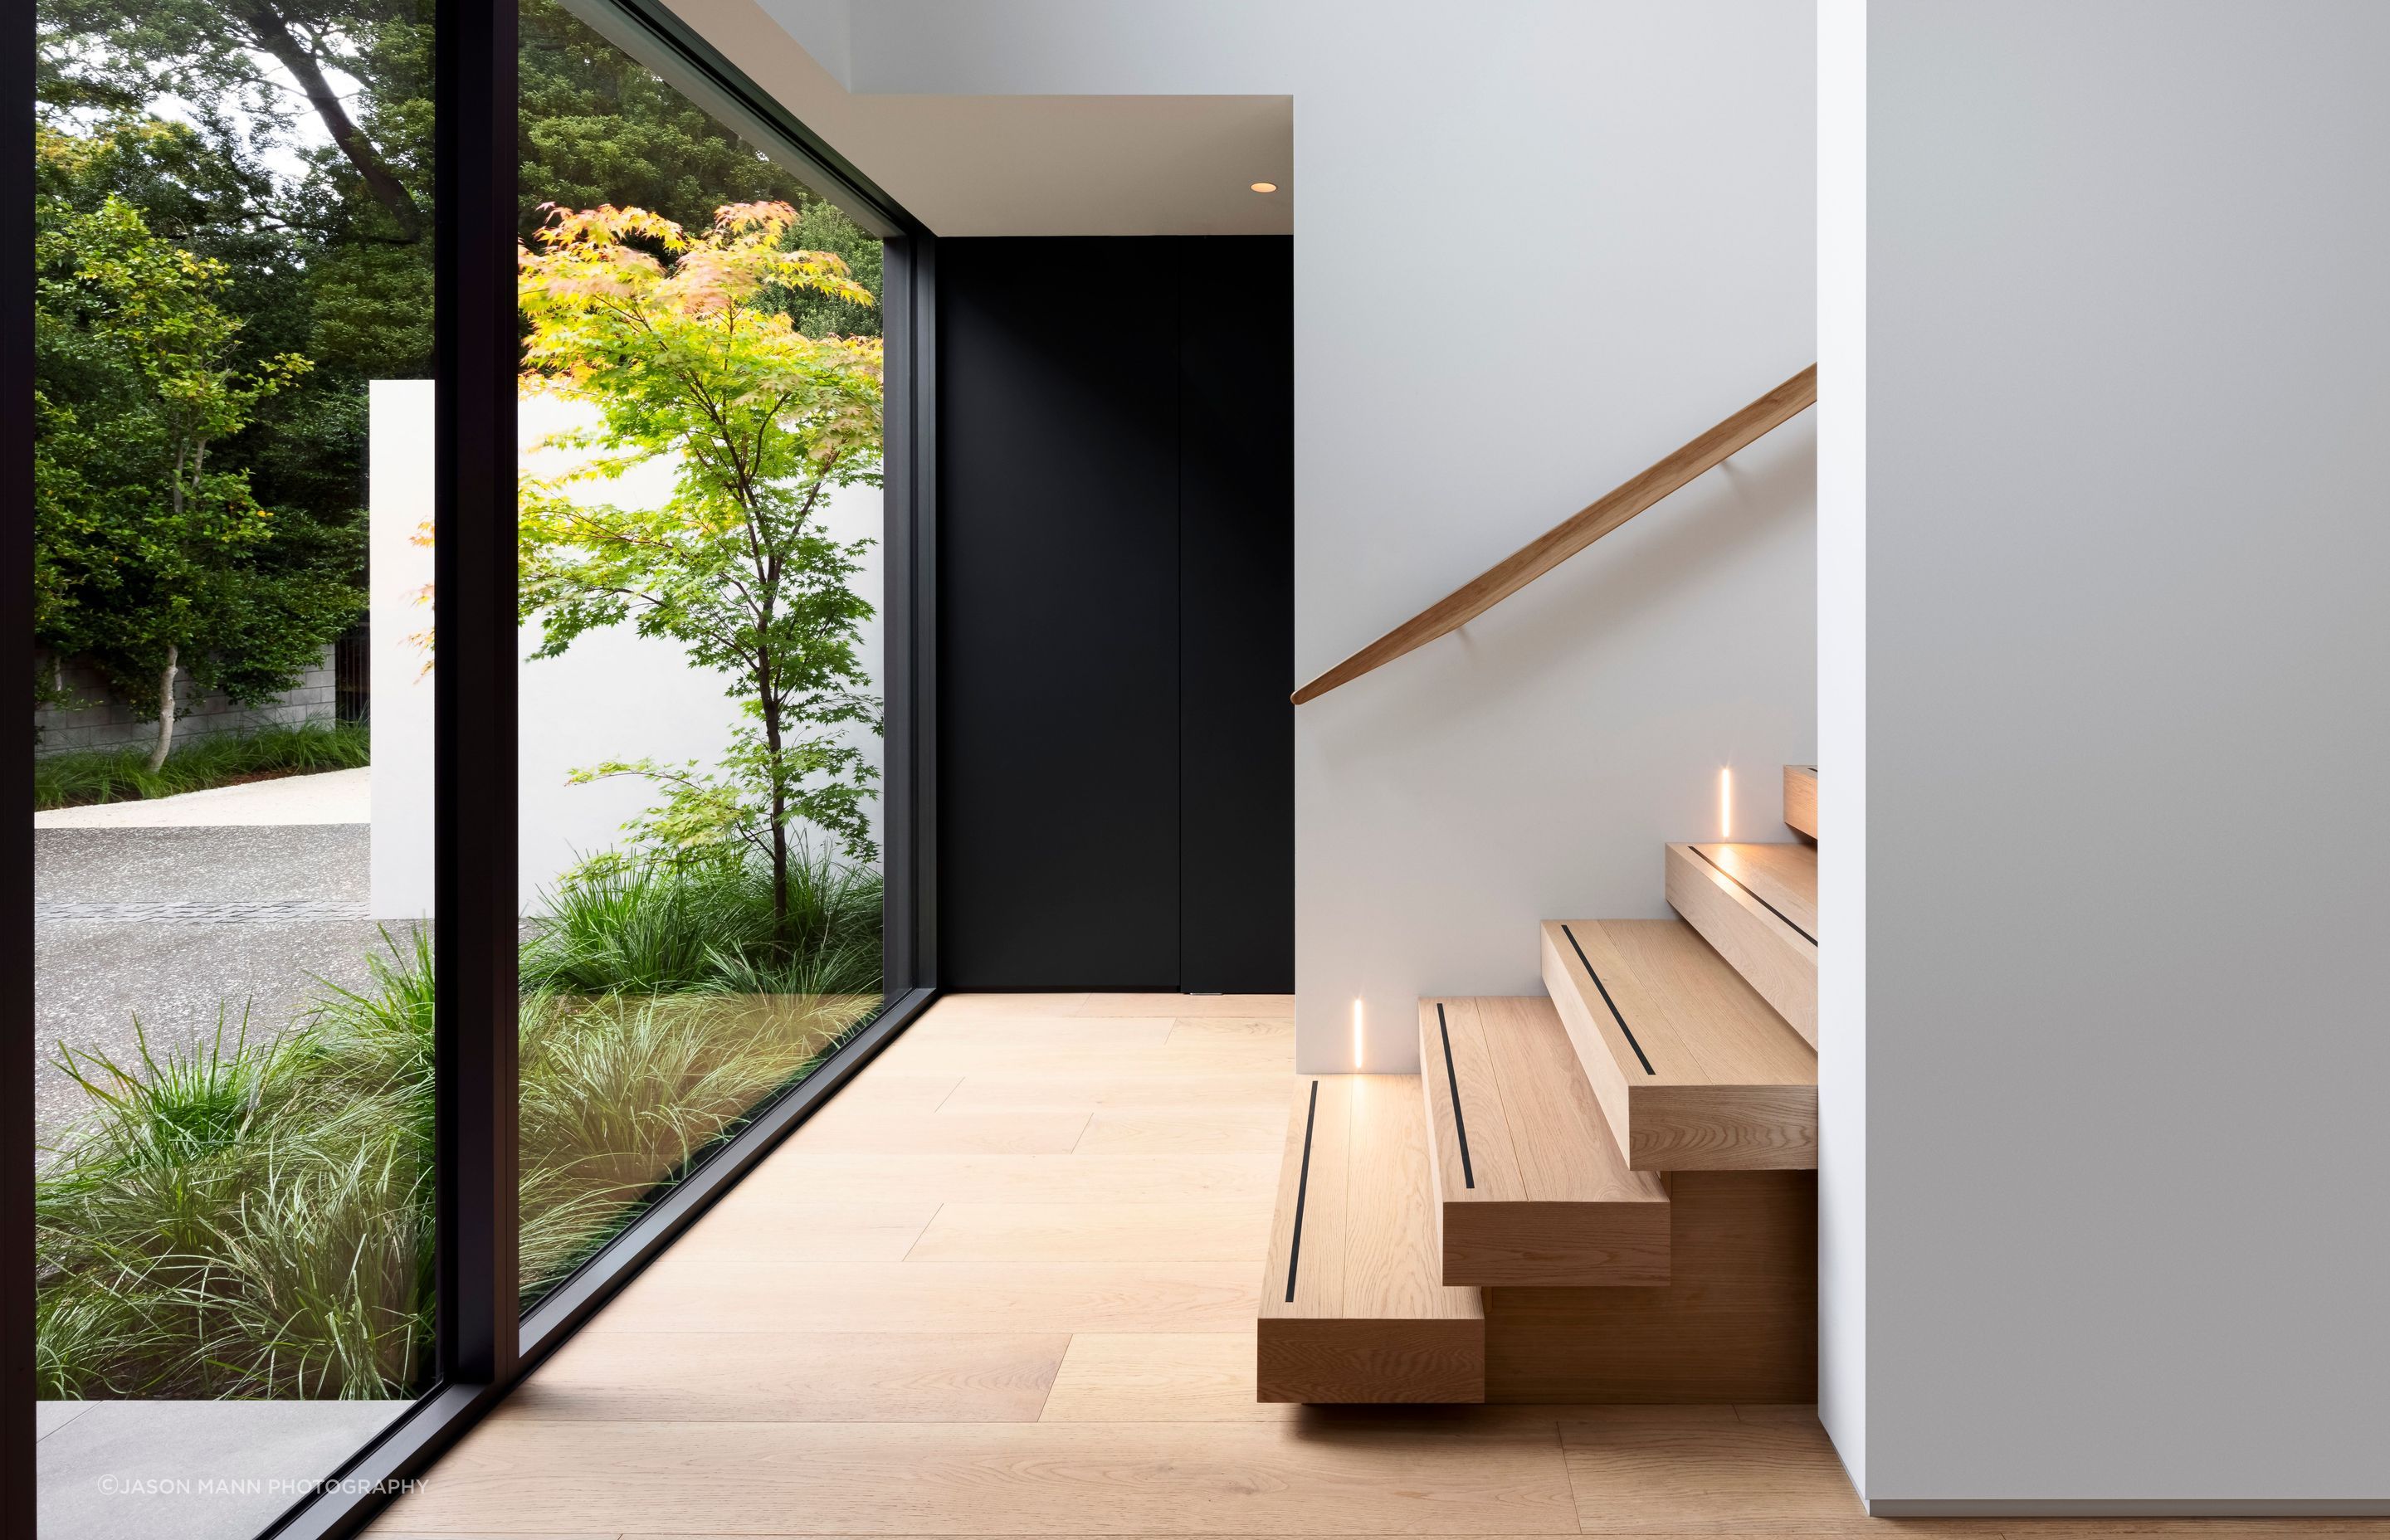 Inside, the dramatic, double-height entry space is bright and welcoming, warmed by a timber staircase that leads upwards towards the second level.